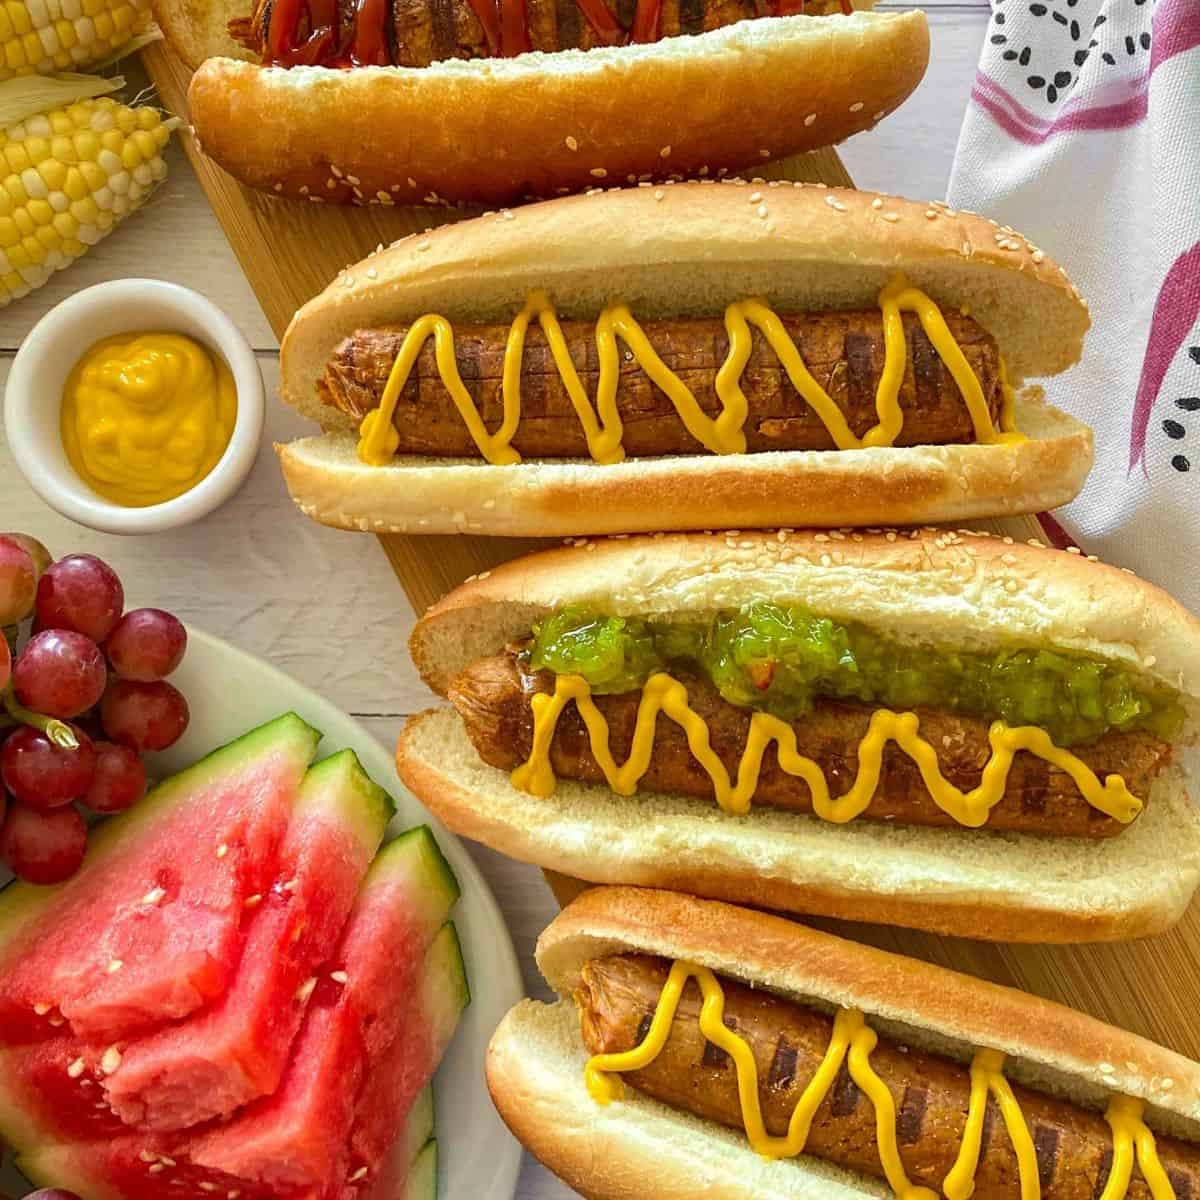 Vegan hot dogs in buns with mustard and relish on top.